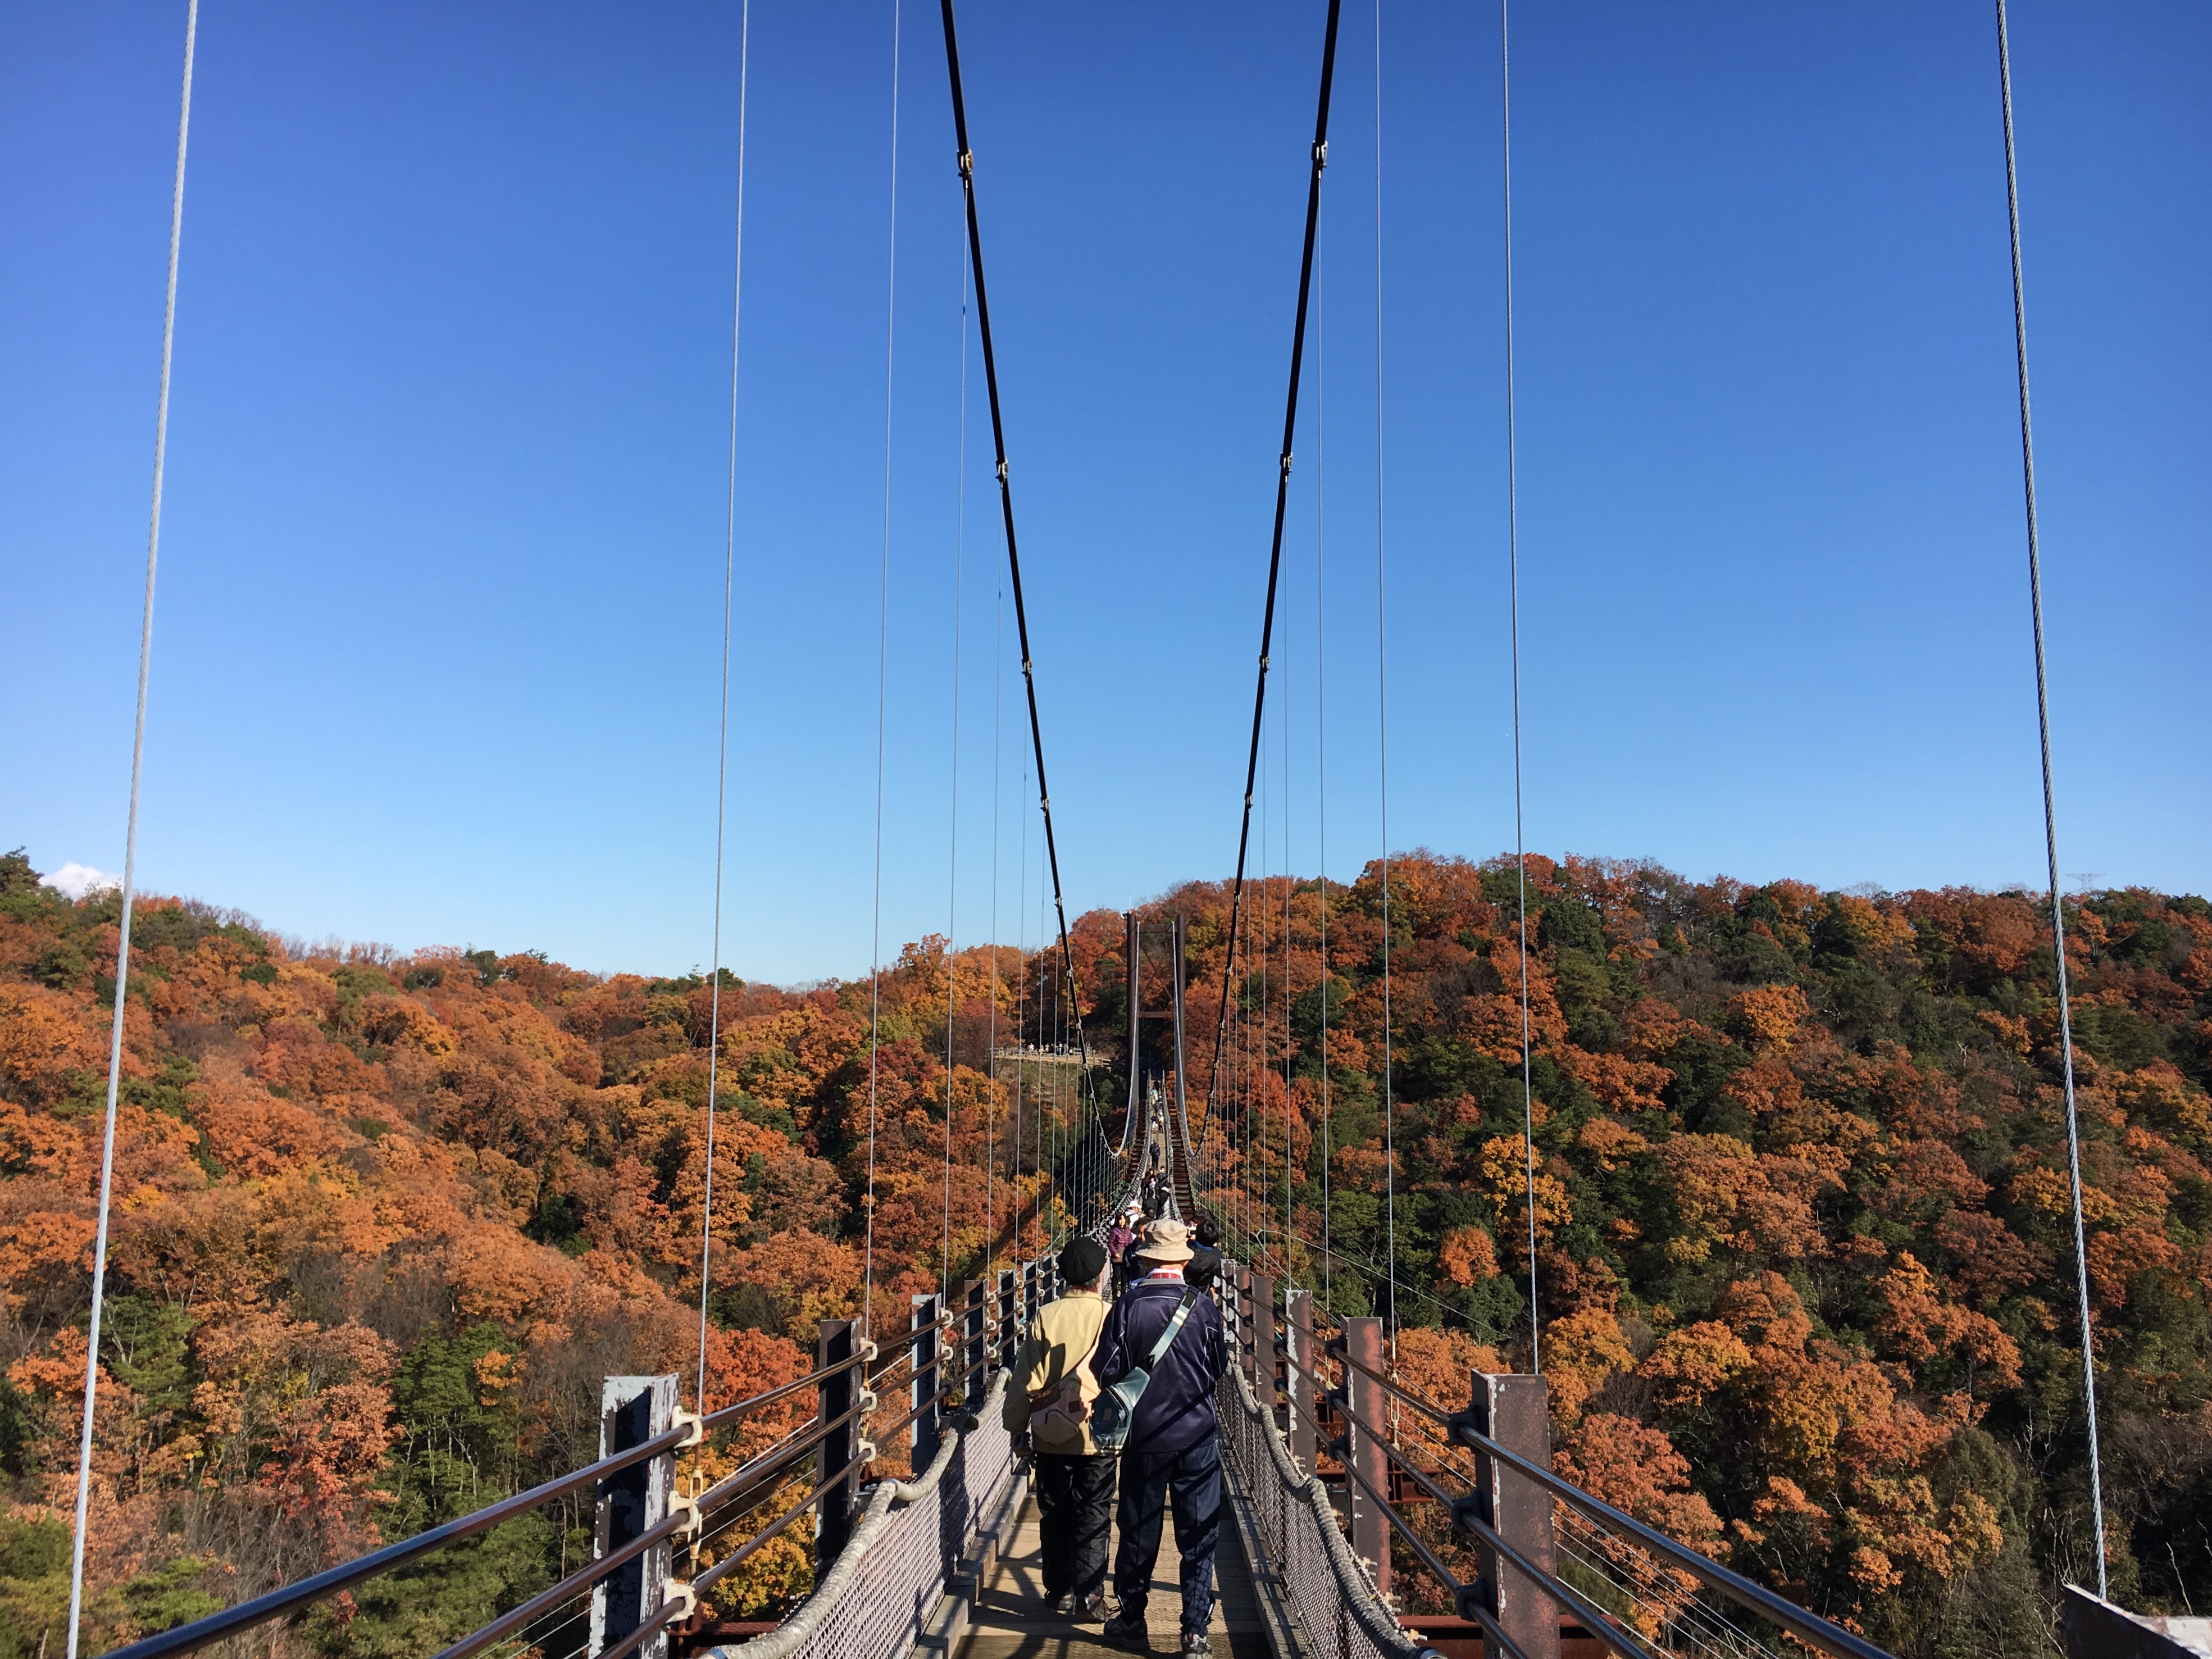 people walking across a suspension bridge surrounded by autumn leaves